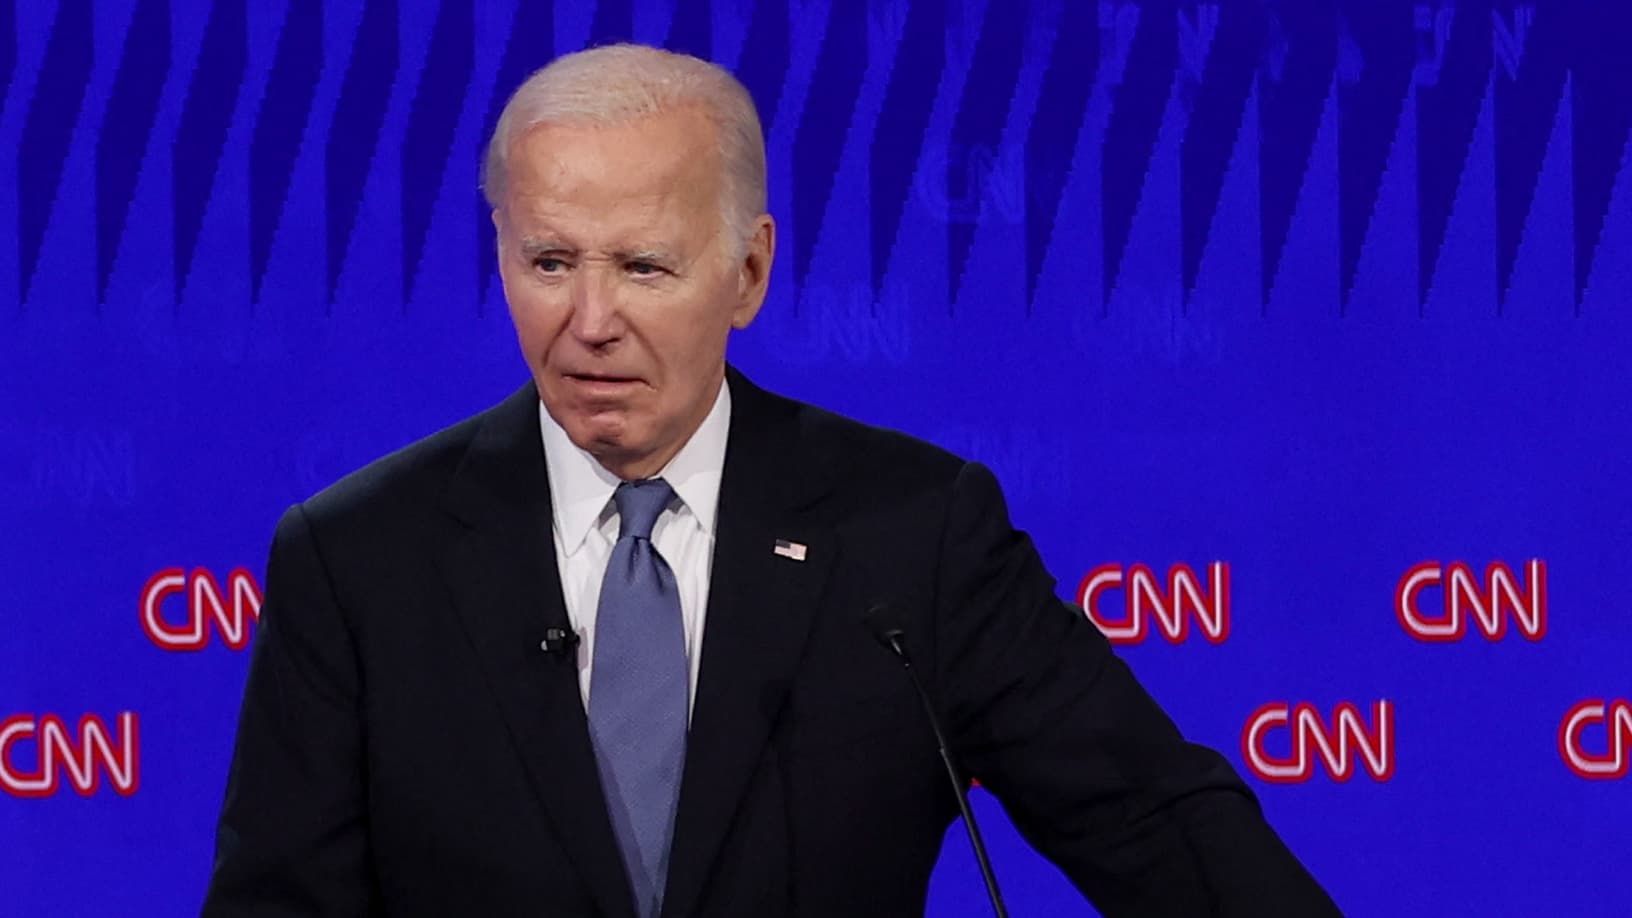 After a disastrous debate, Joe Biden tries to reassure donors